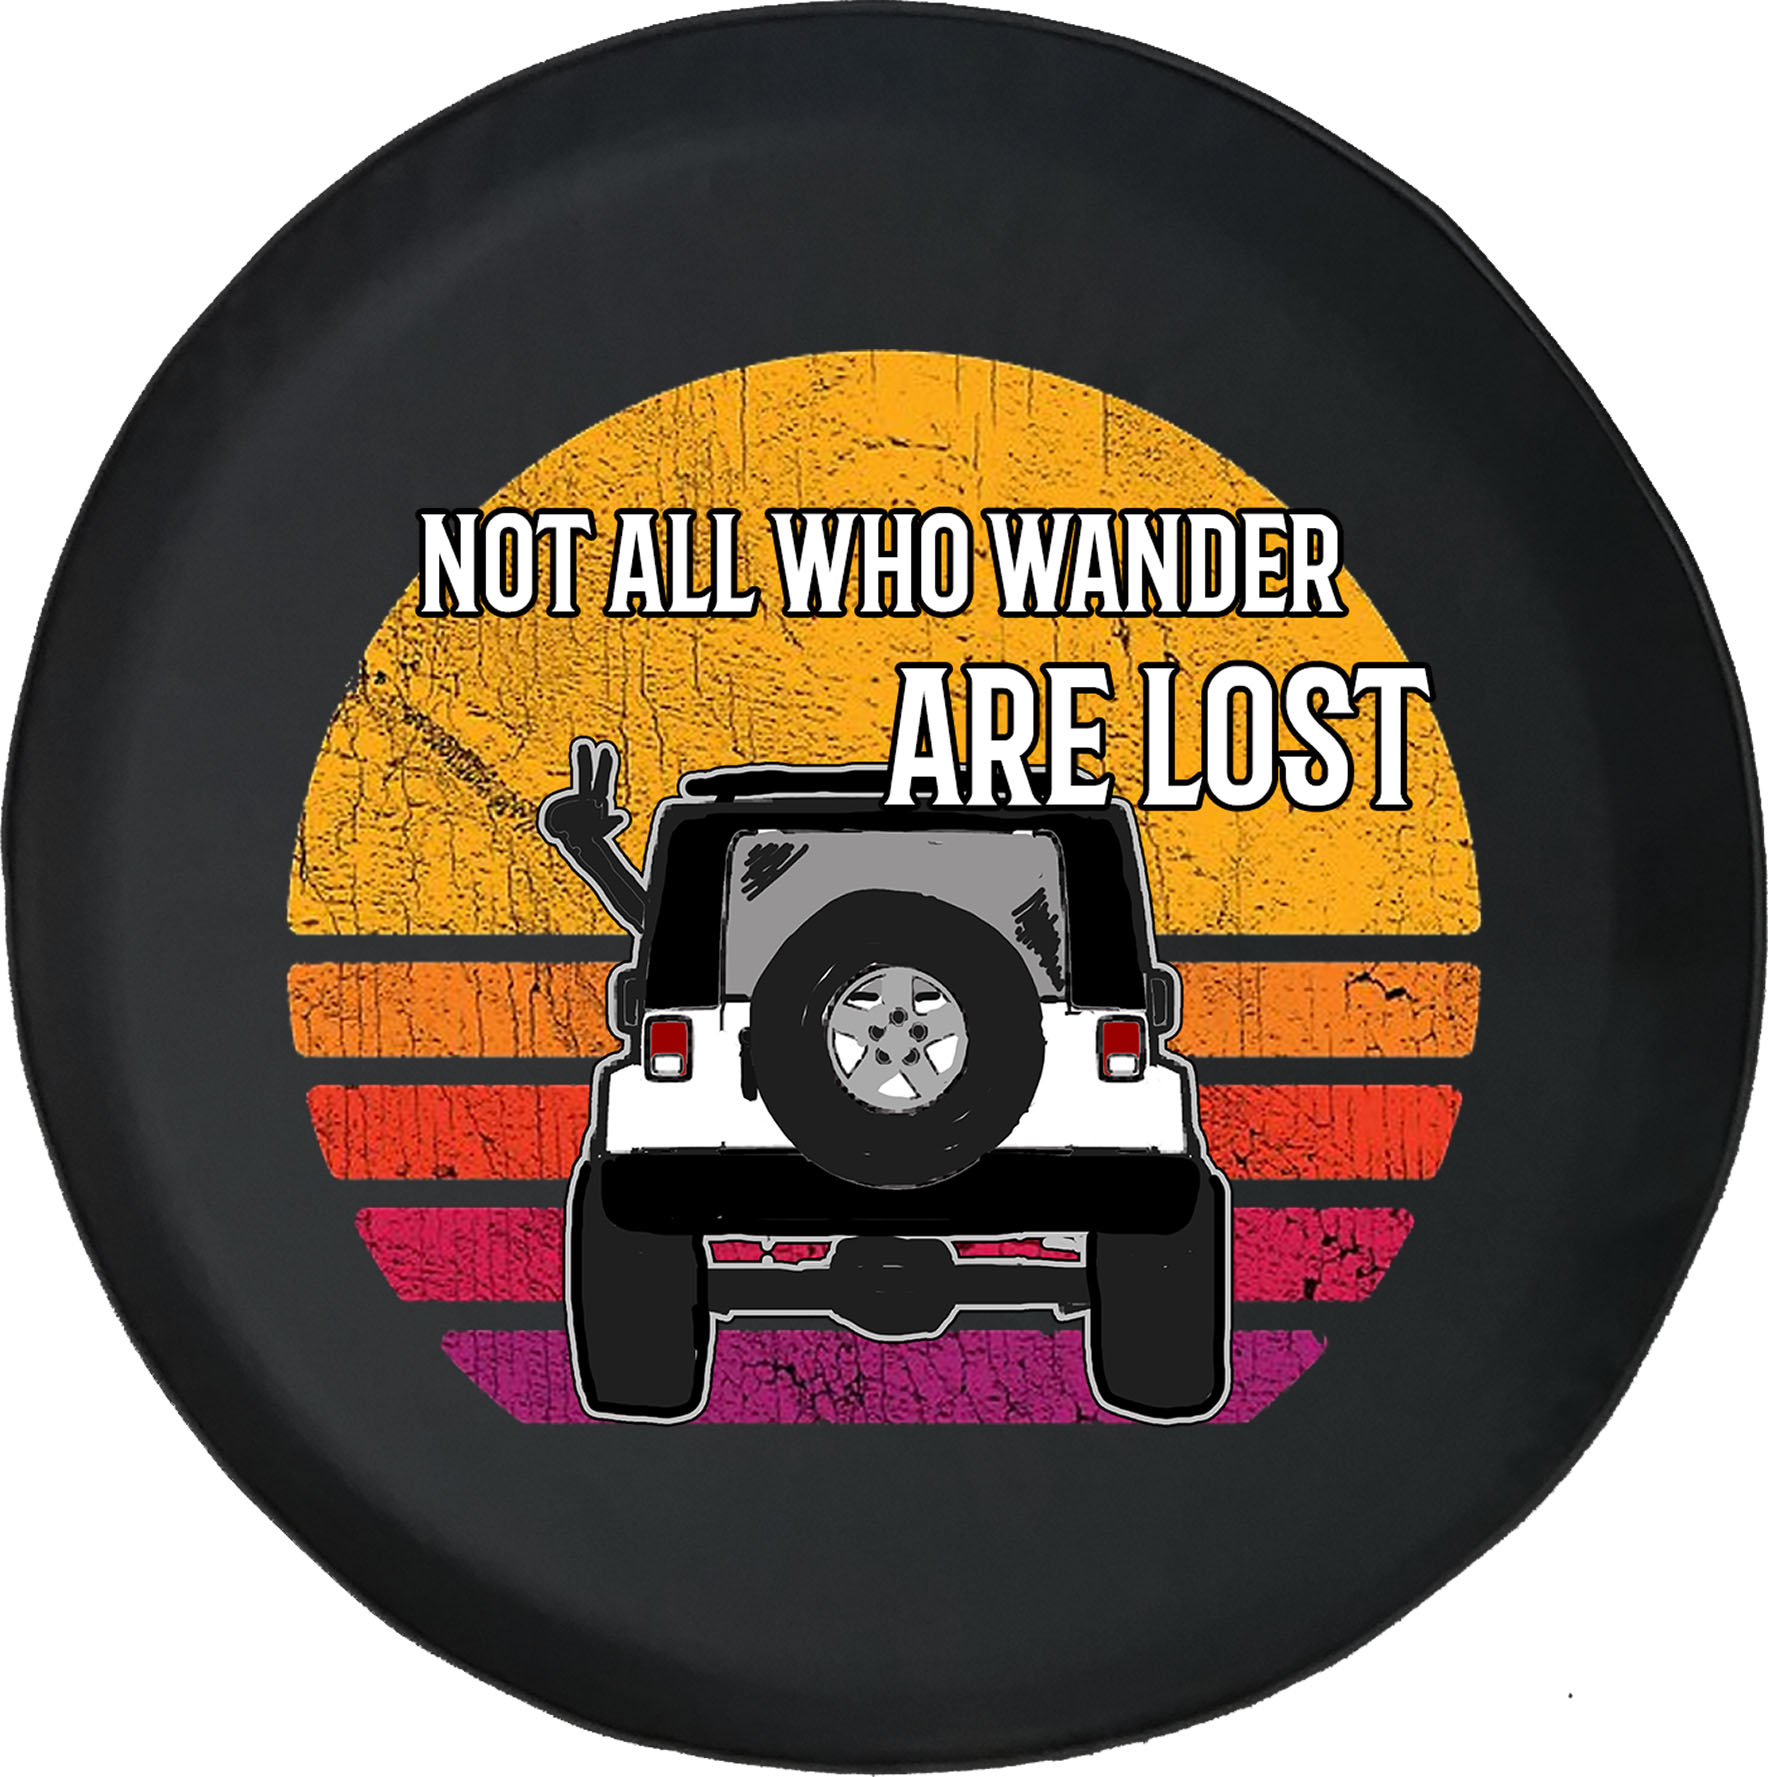 Black Tire Covers Tire Accessories for Campers, SUVs, Trailers, Trucks,  RVs and More Not All Who Wander are Lost Sunset Black 32 Inch 